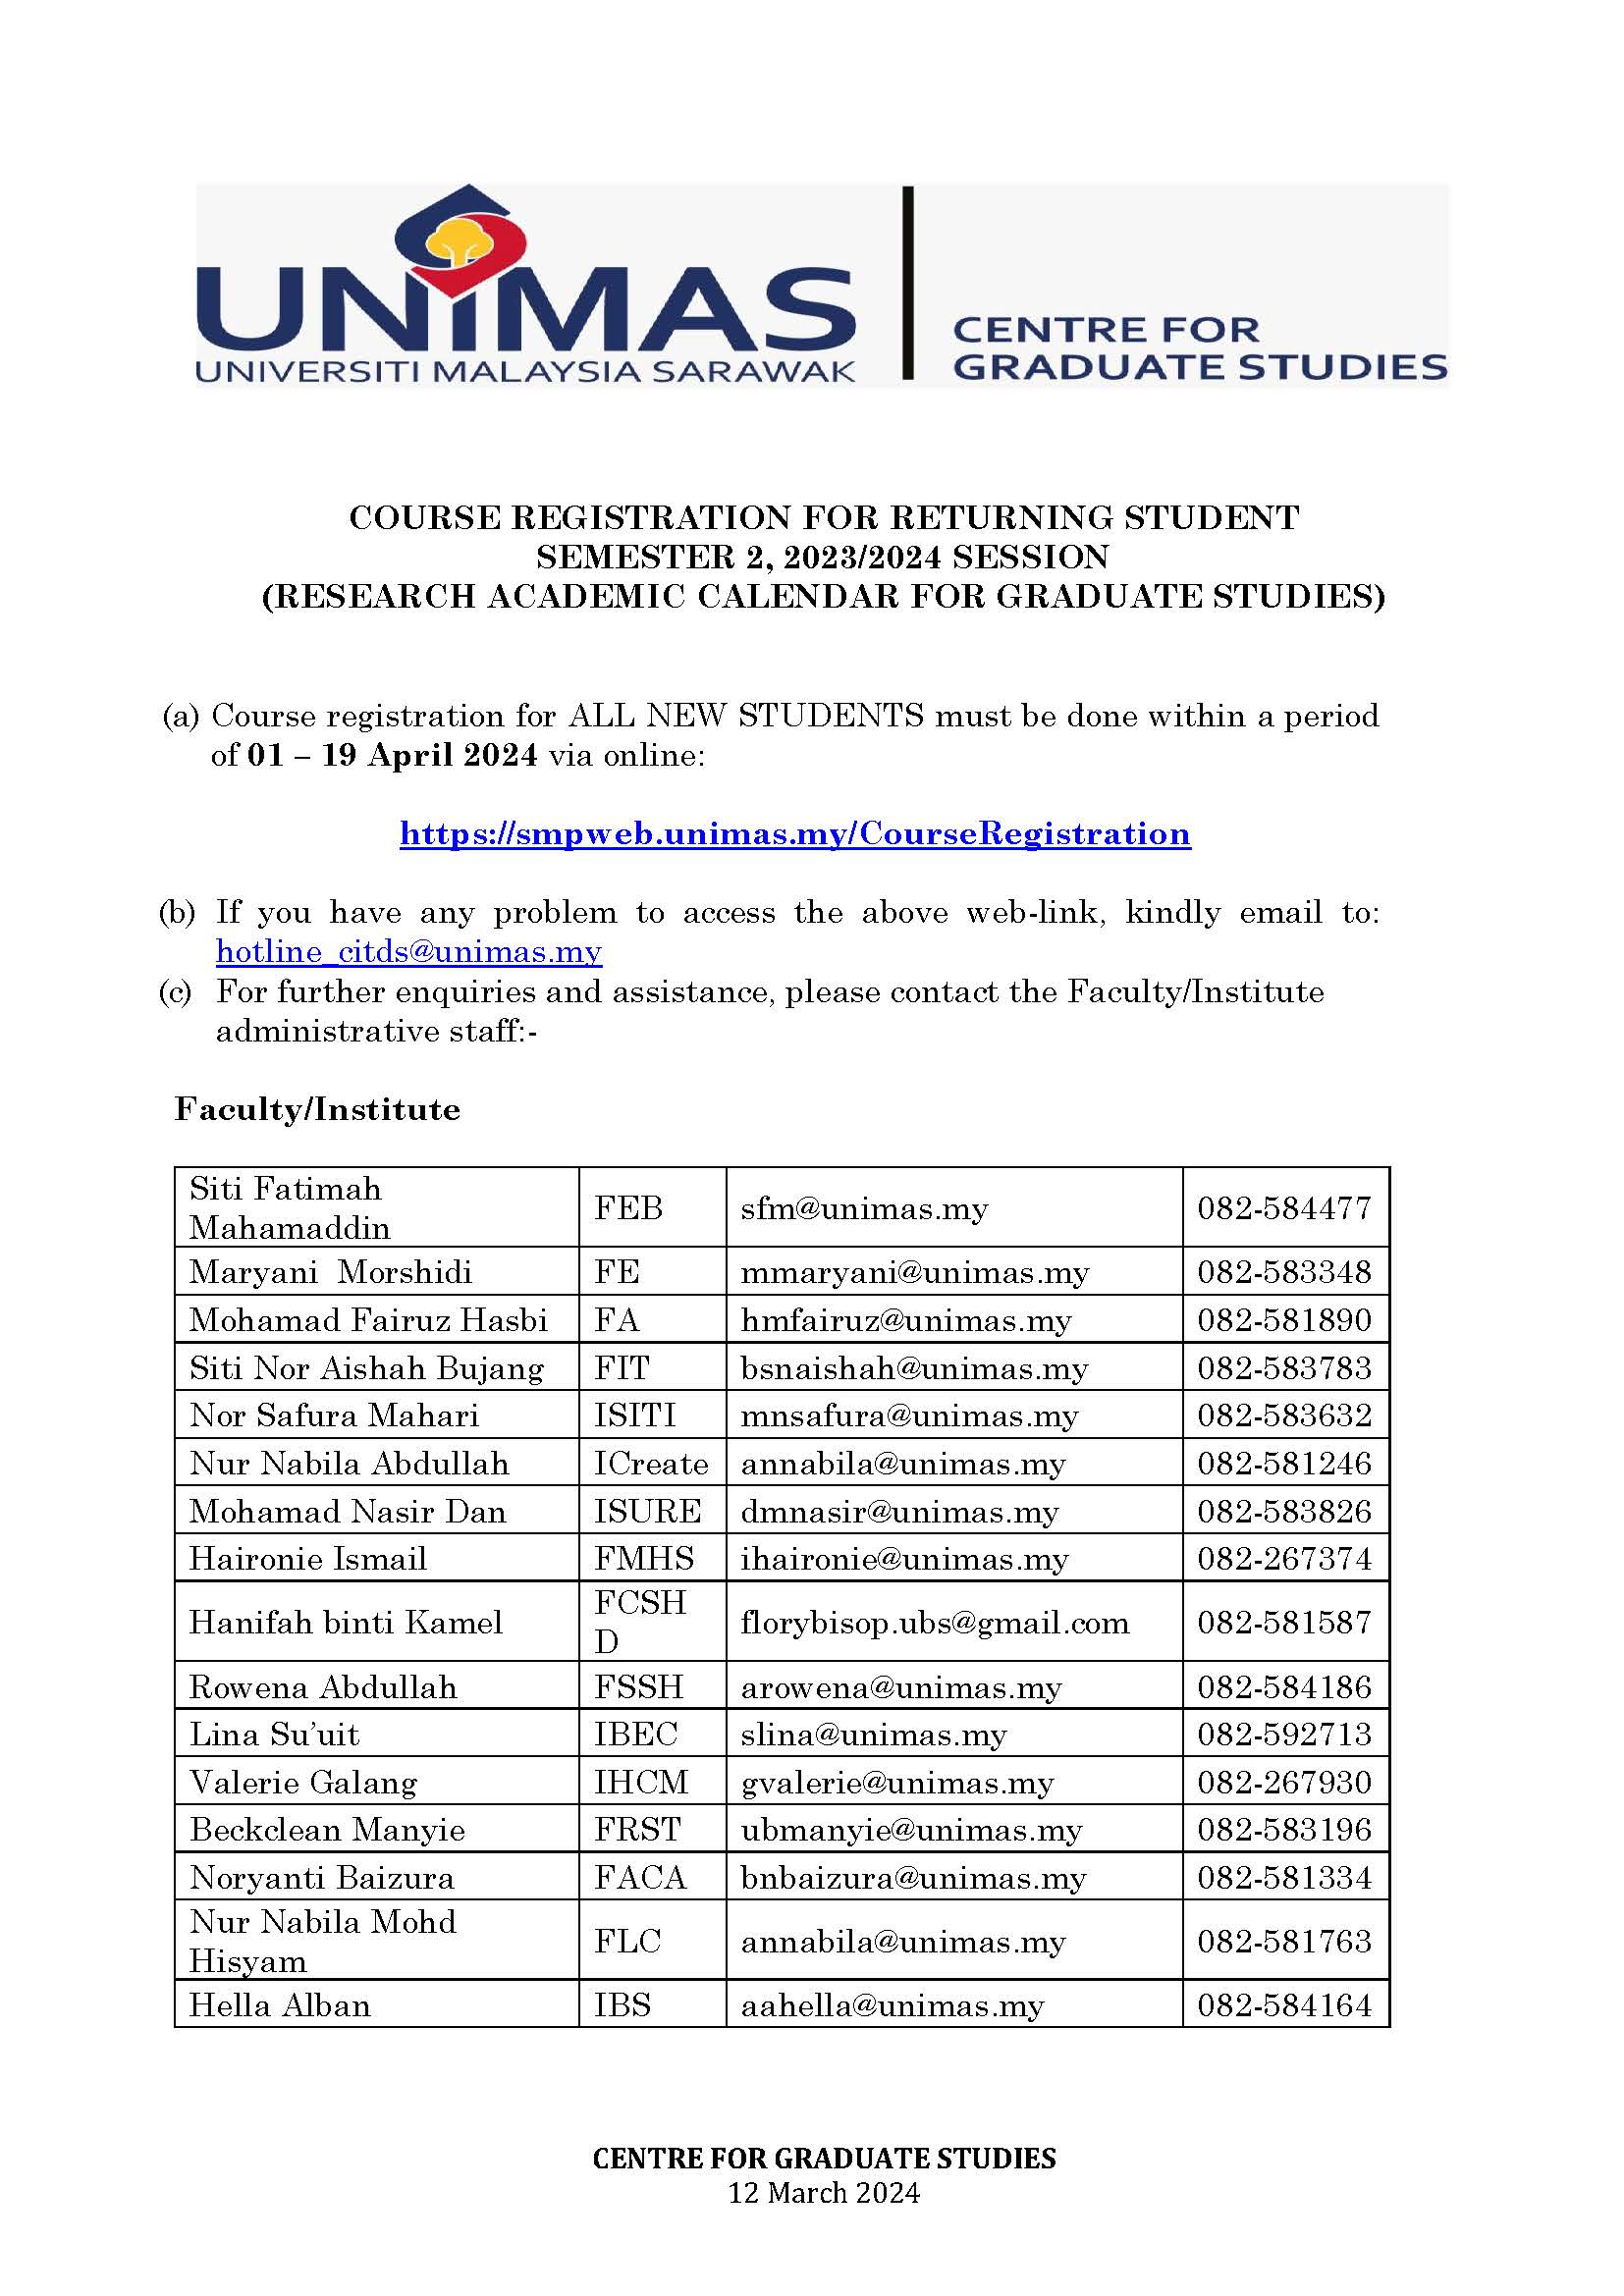 NOTICE COURSE REGISTRATION FOR ALL STUDENTS1.jpg